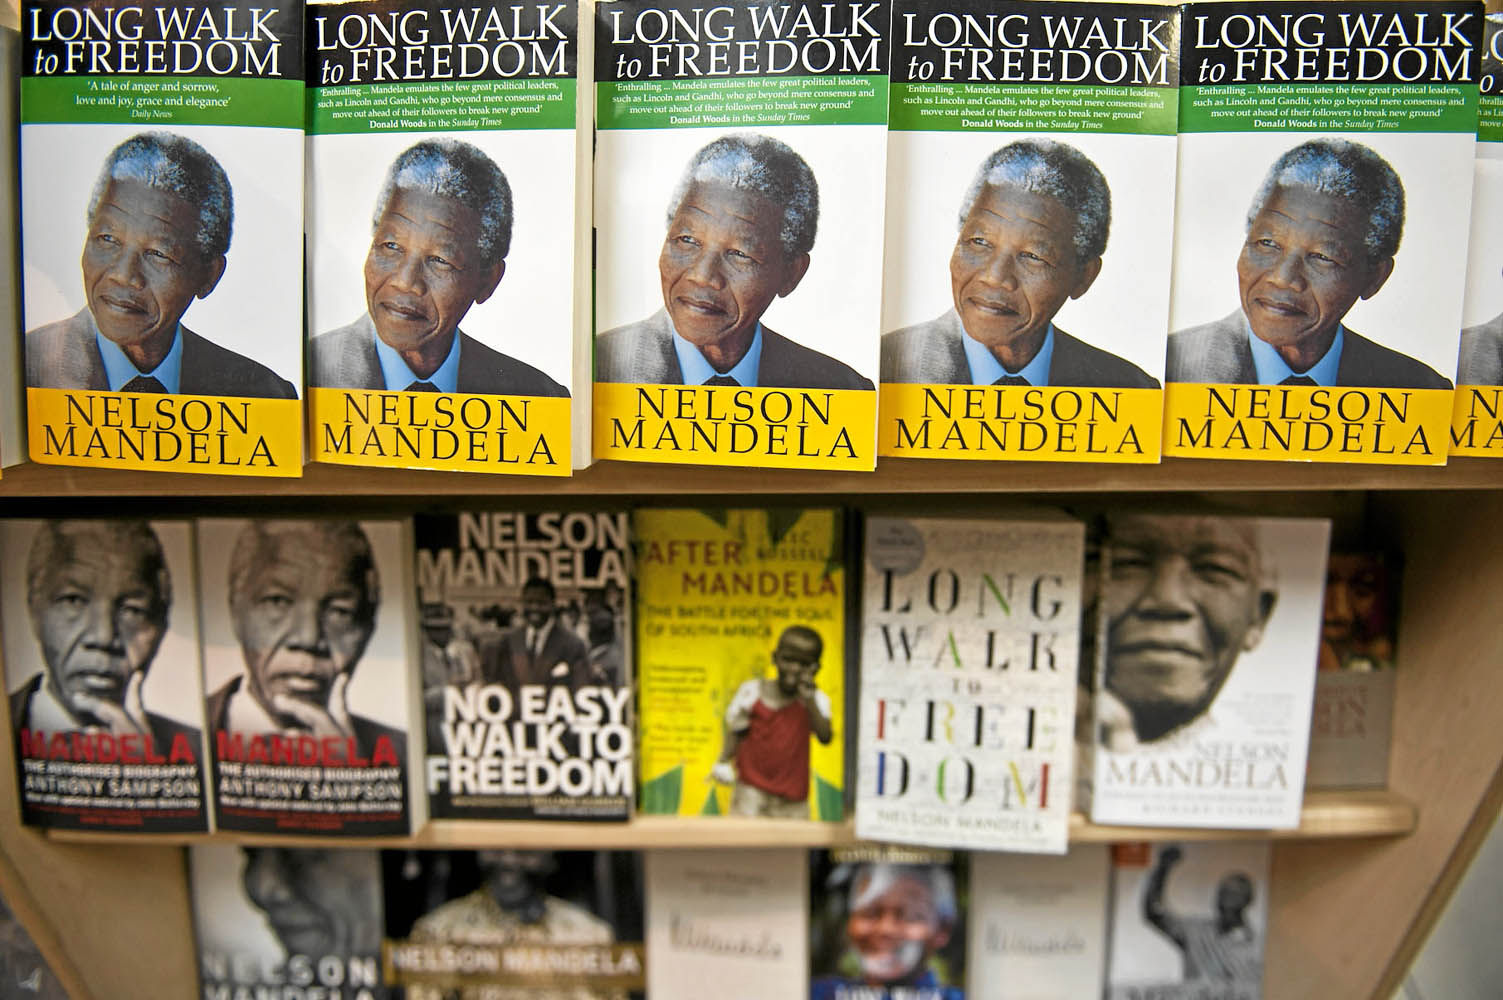 If you shell out R120 for the latest Nelson Mandela biography, you may find yourself disappointed, says Phillip de Wet.